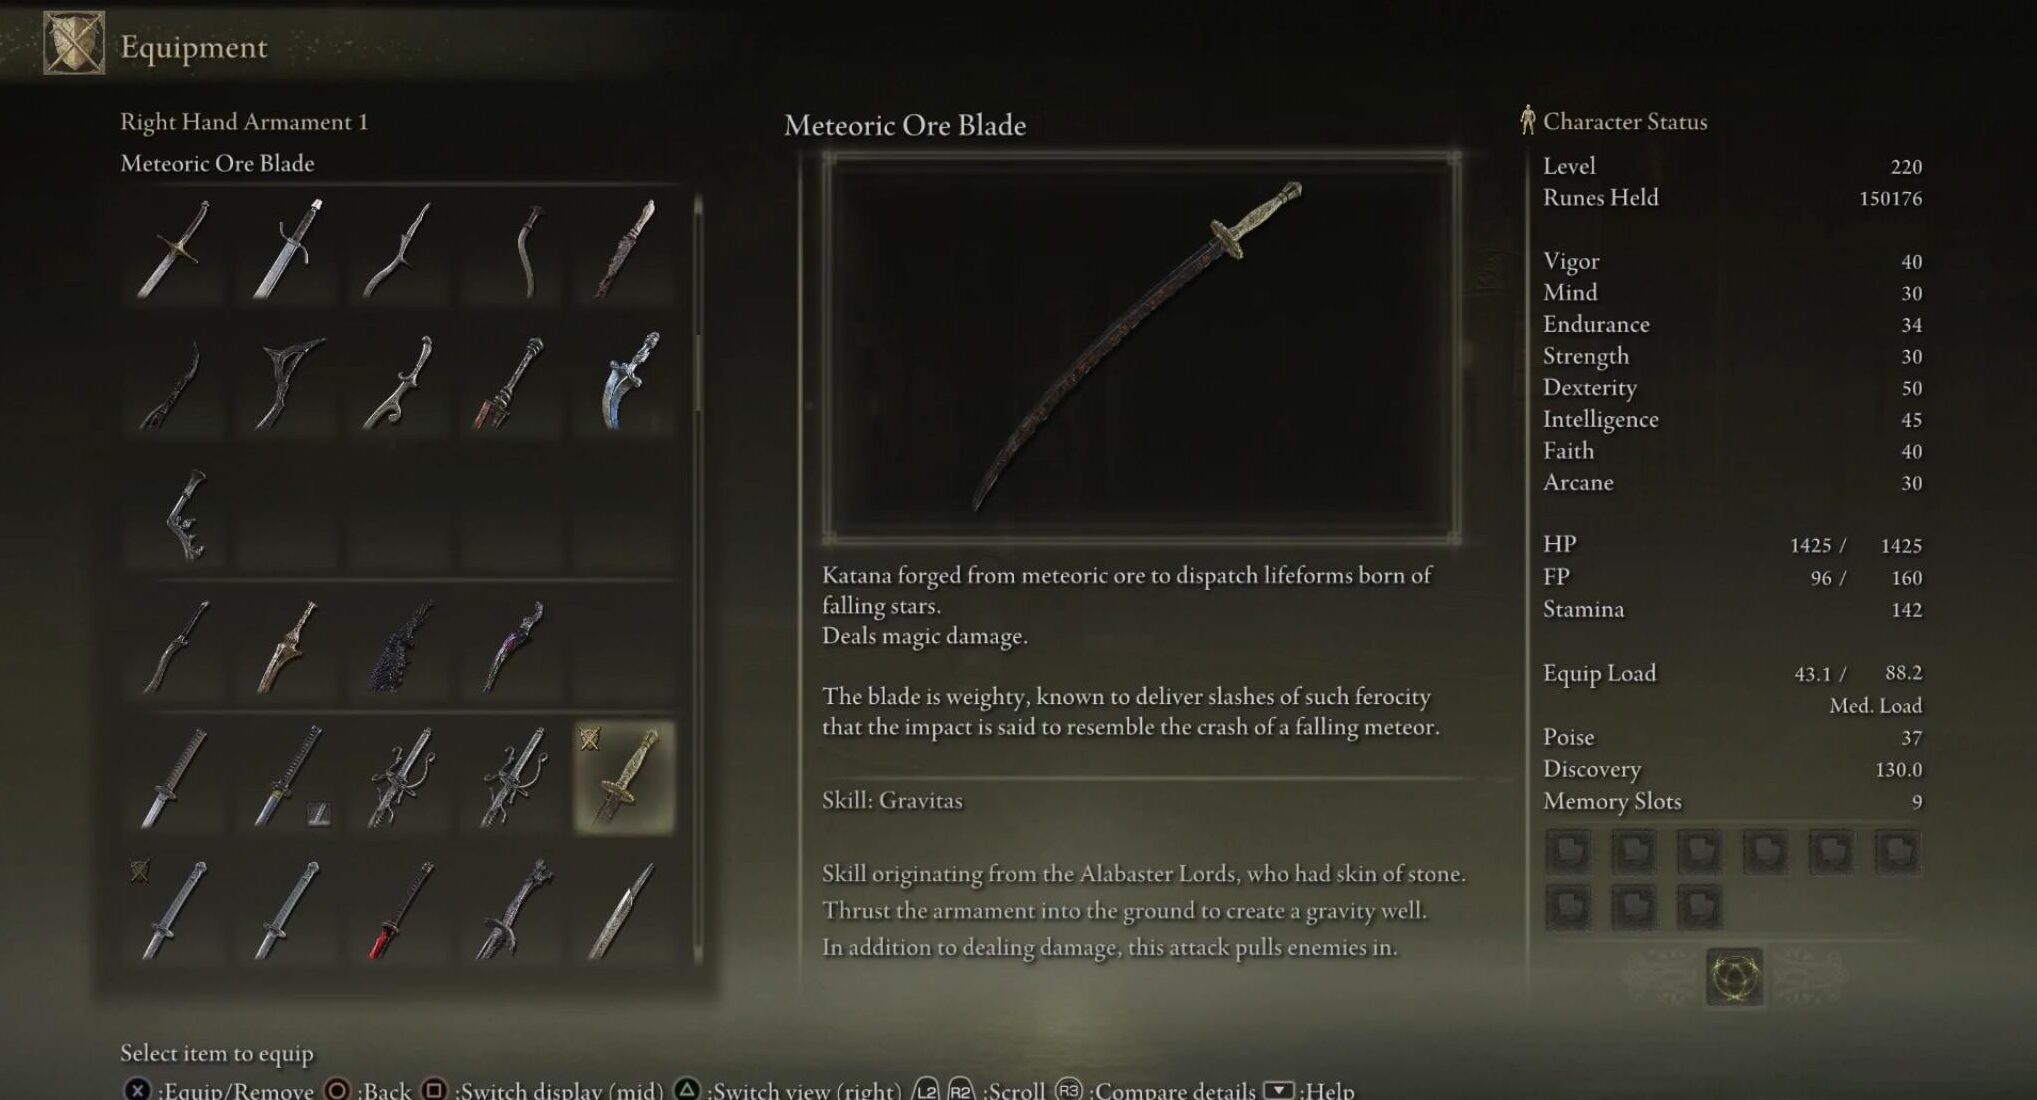 Meteoric Ore Blade and its stats